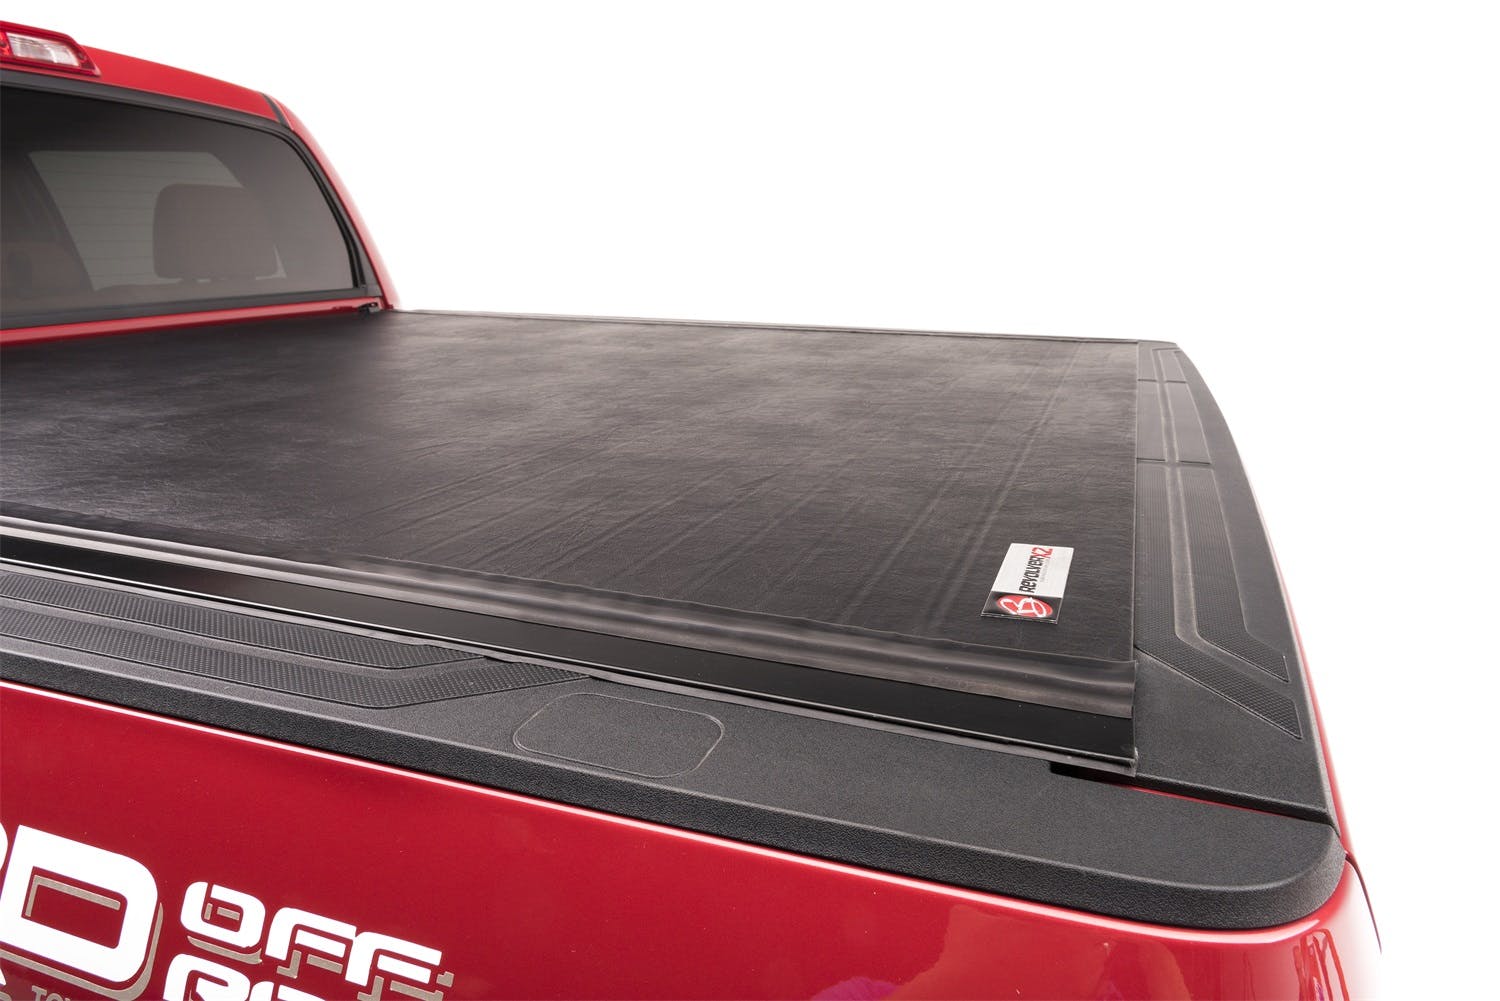 BAK Industries 39409 Revolver X2 Hard Rolling Truck Bed Cover